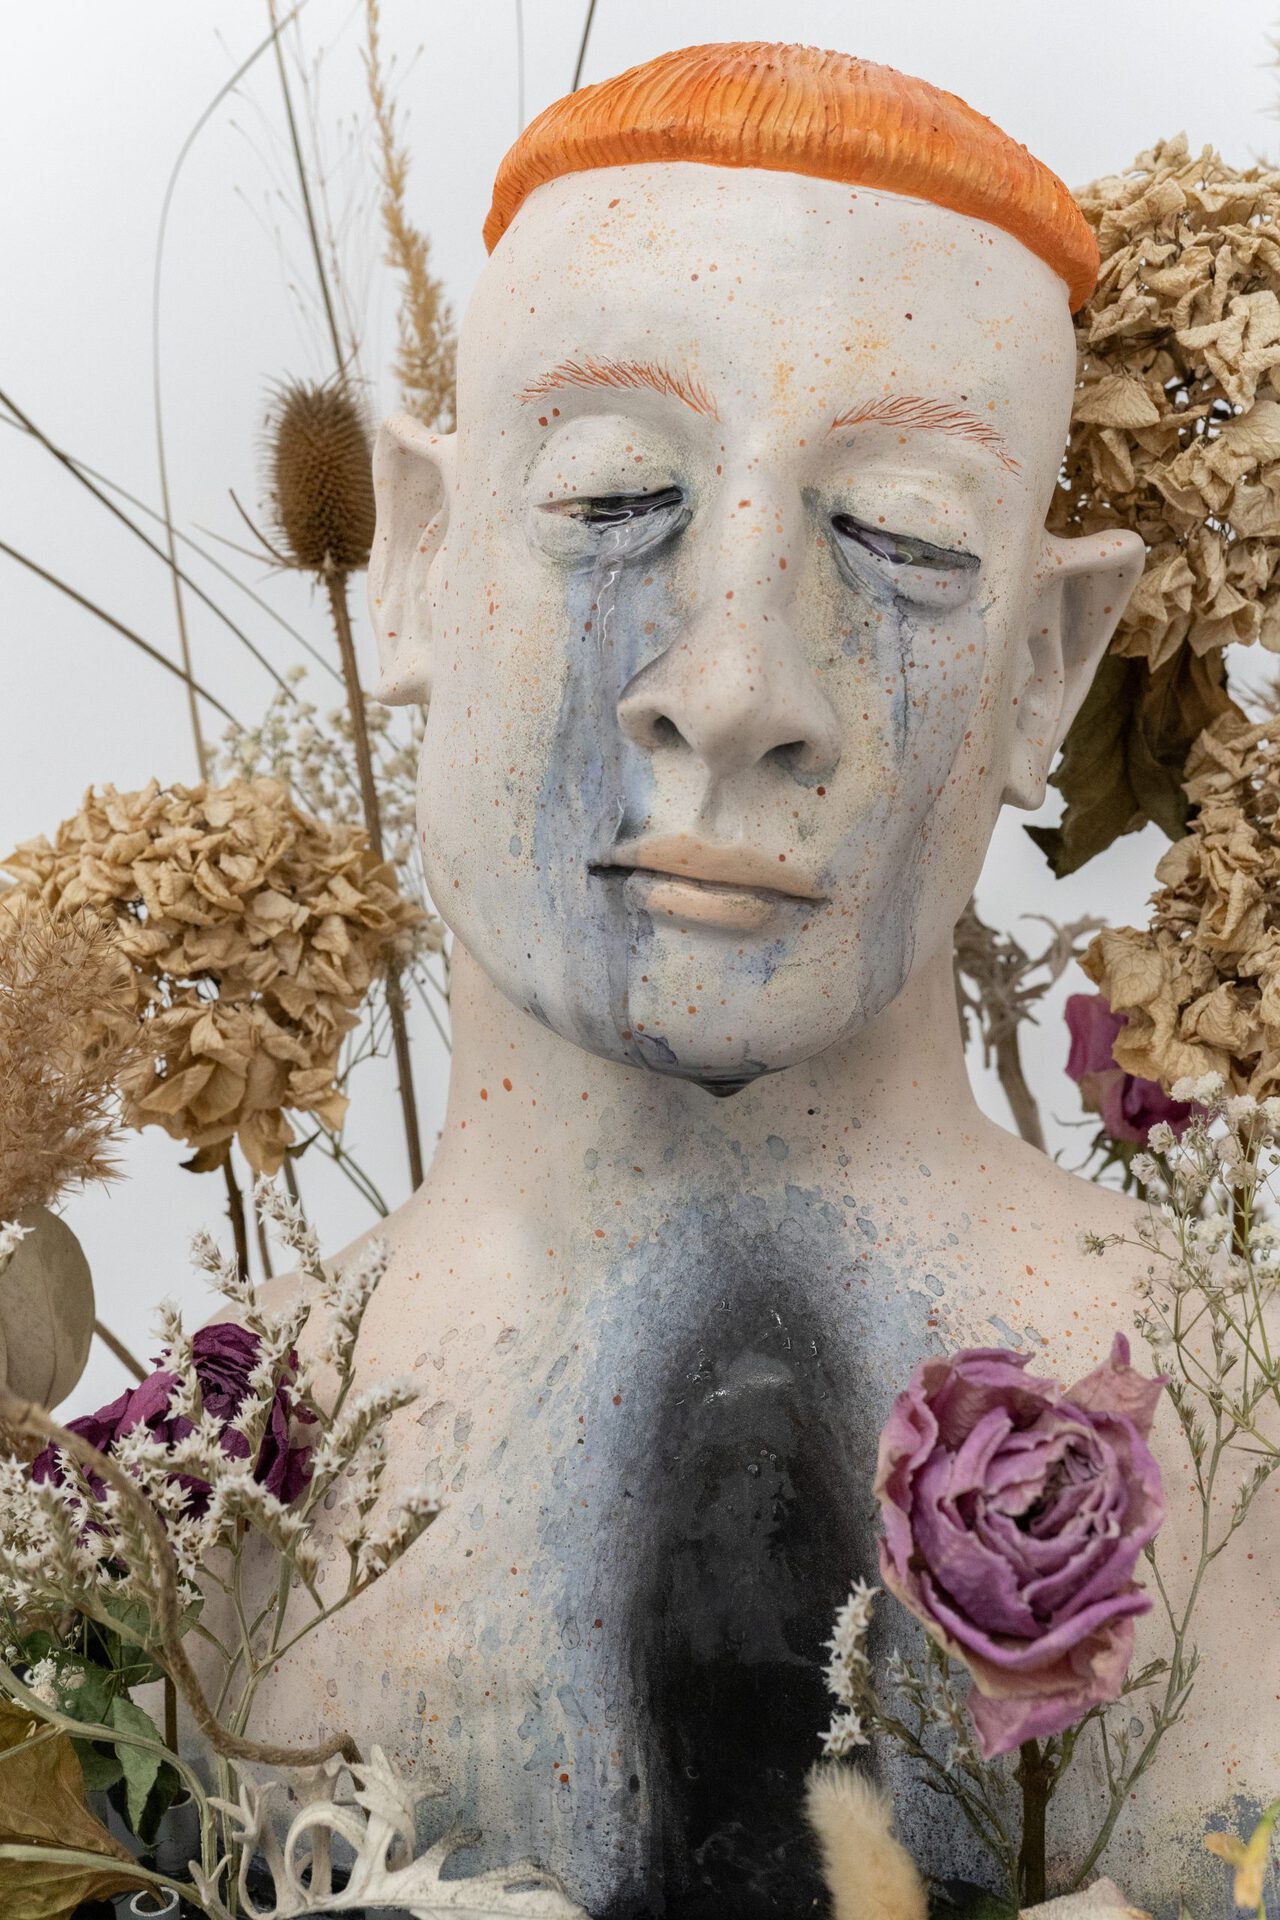 Exhibition view. Lea Rasovszky, Criers (Is it Weird That I Want to Taste Your Tears?), 2019, dyptich, dried flowers, metal support, 150 x 50 x 50 cm. Photo credit: infi.ro